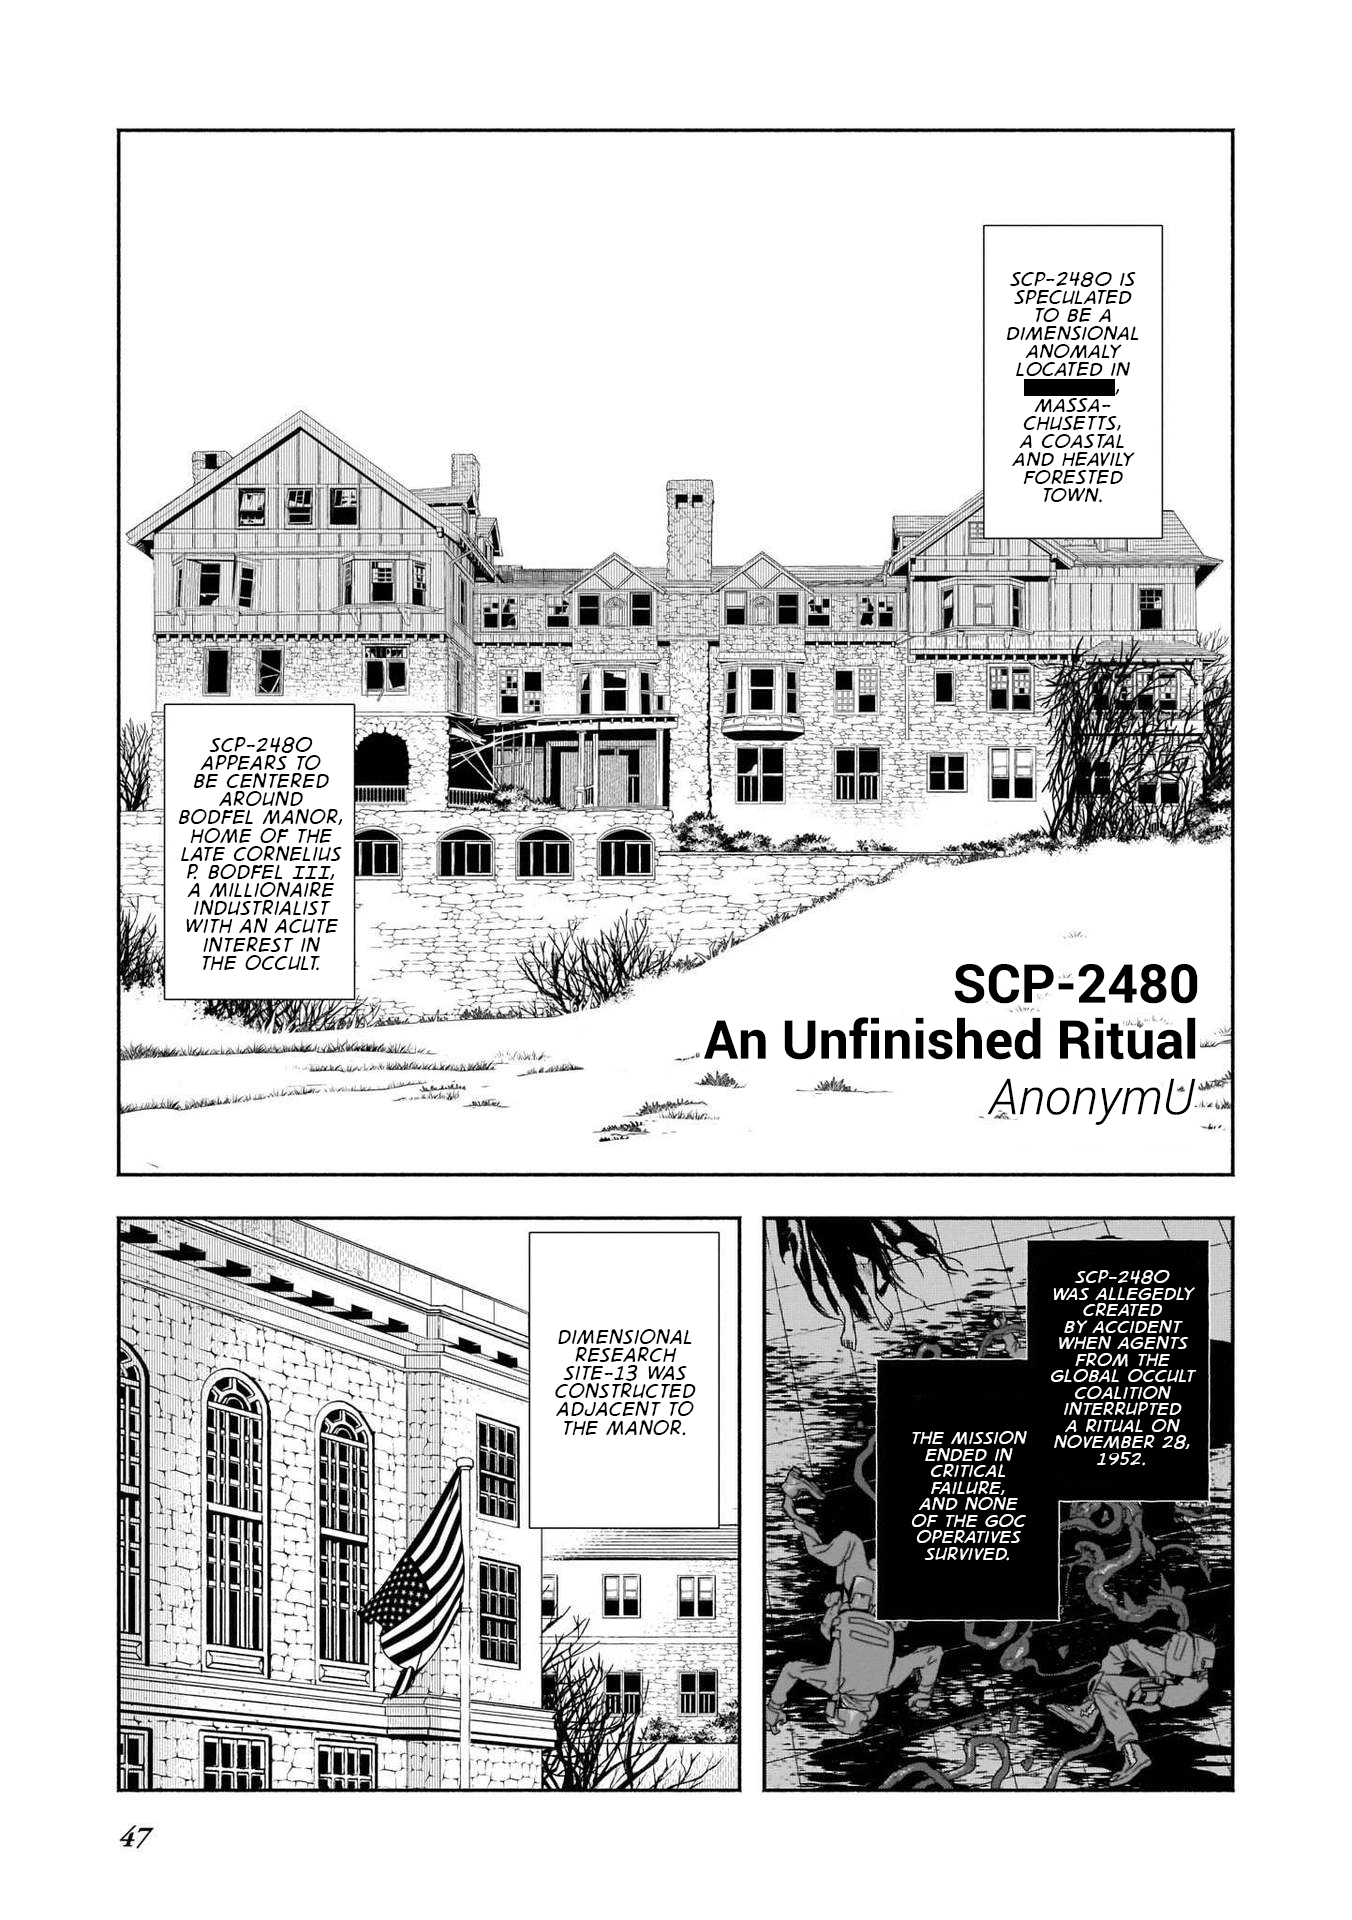 Scp Comic Anthology - Kai Vol.1 Chapter 5: Scp-2480 - An Unfinished Ritual (Anonymu) - Picture 1